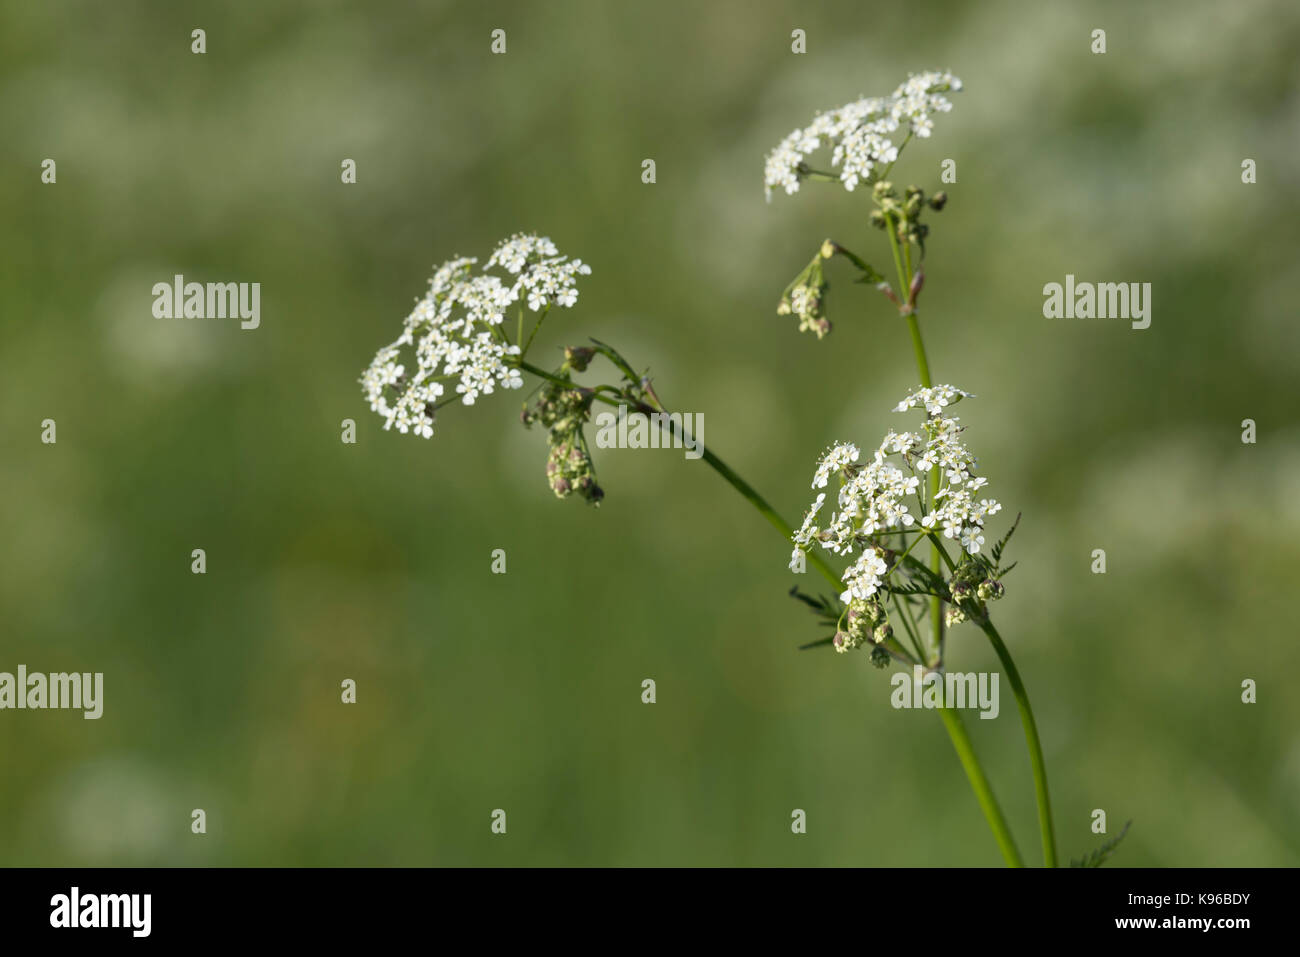 White Umbels of Cow Parsley Stock Photo